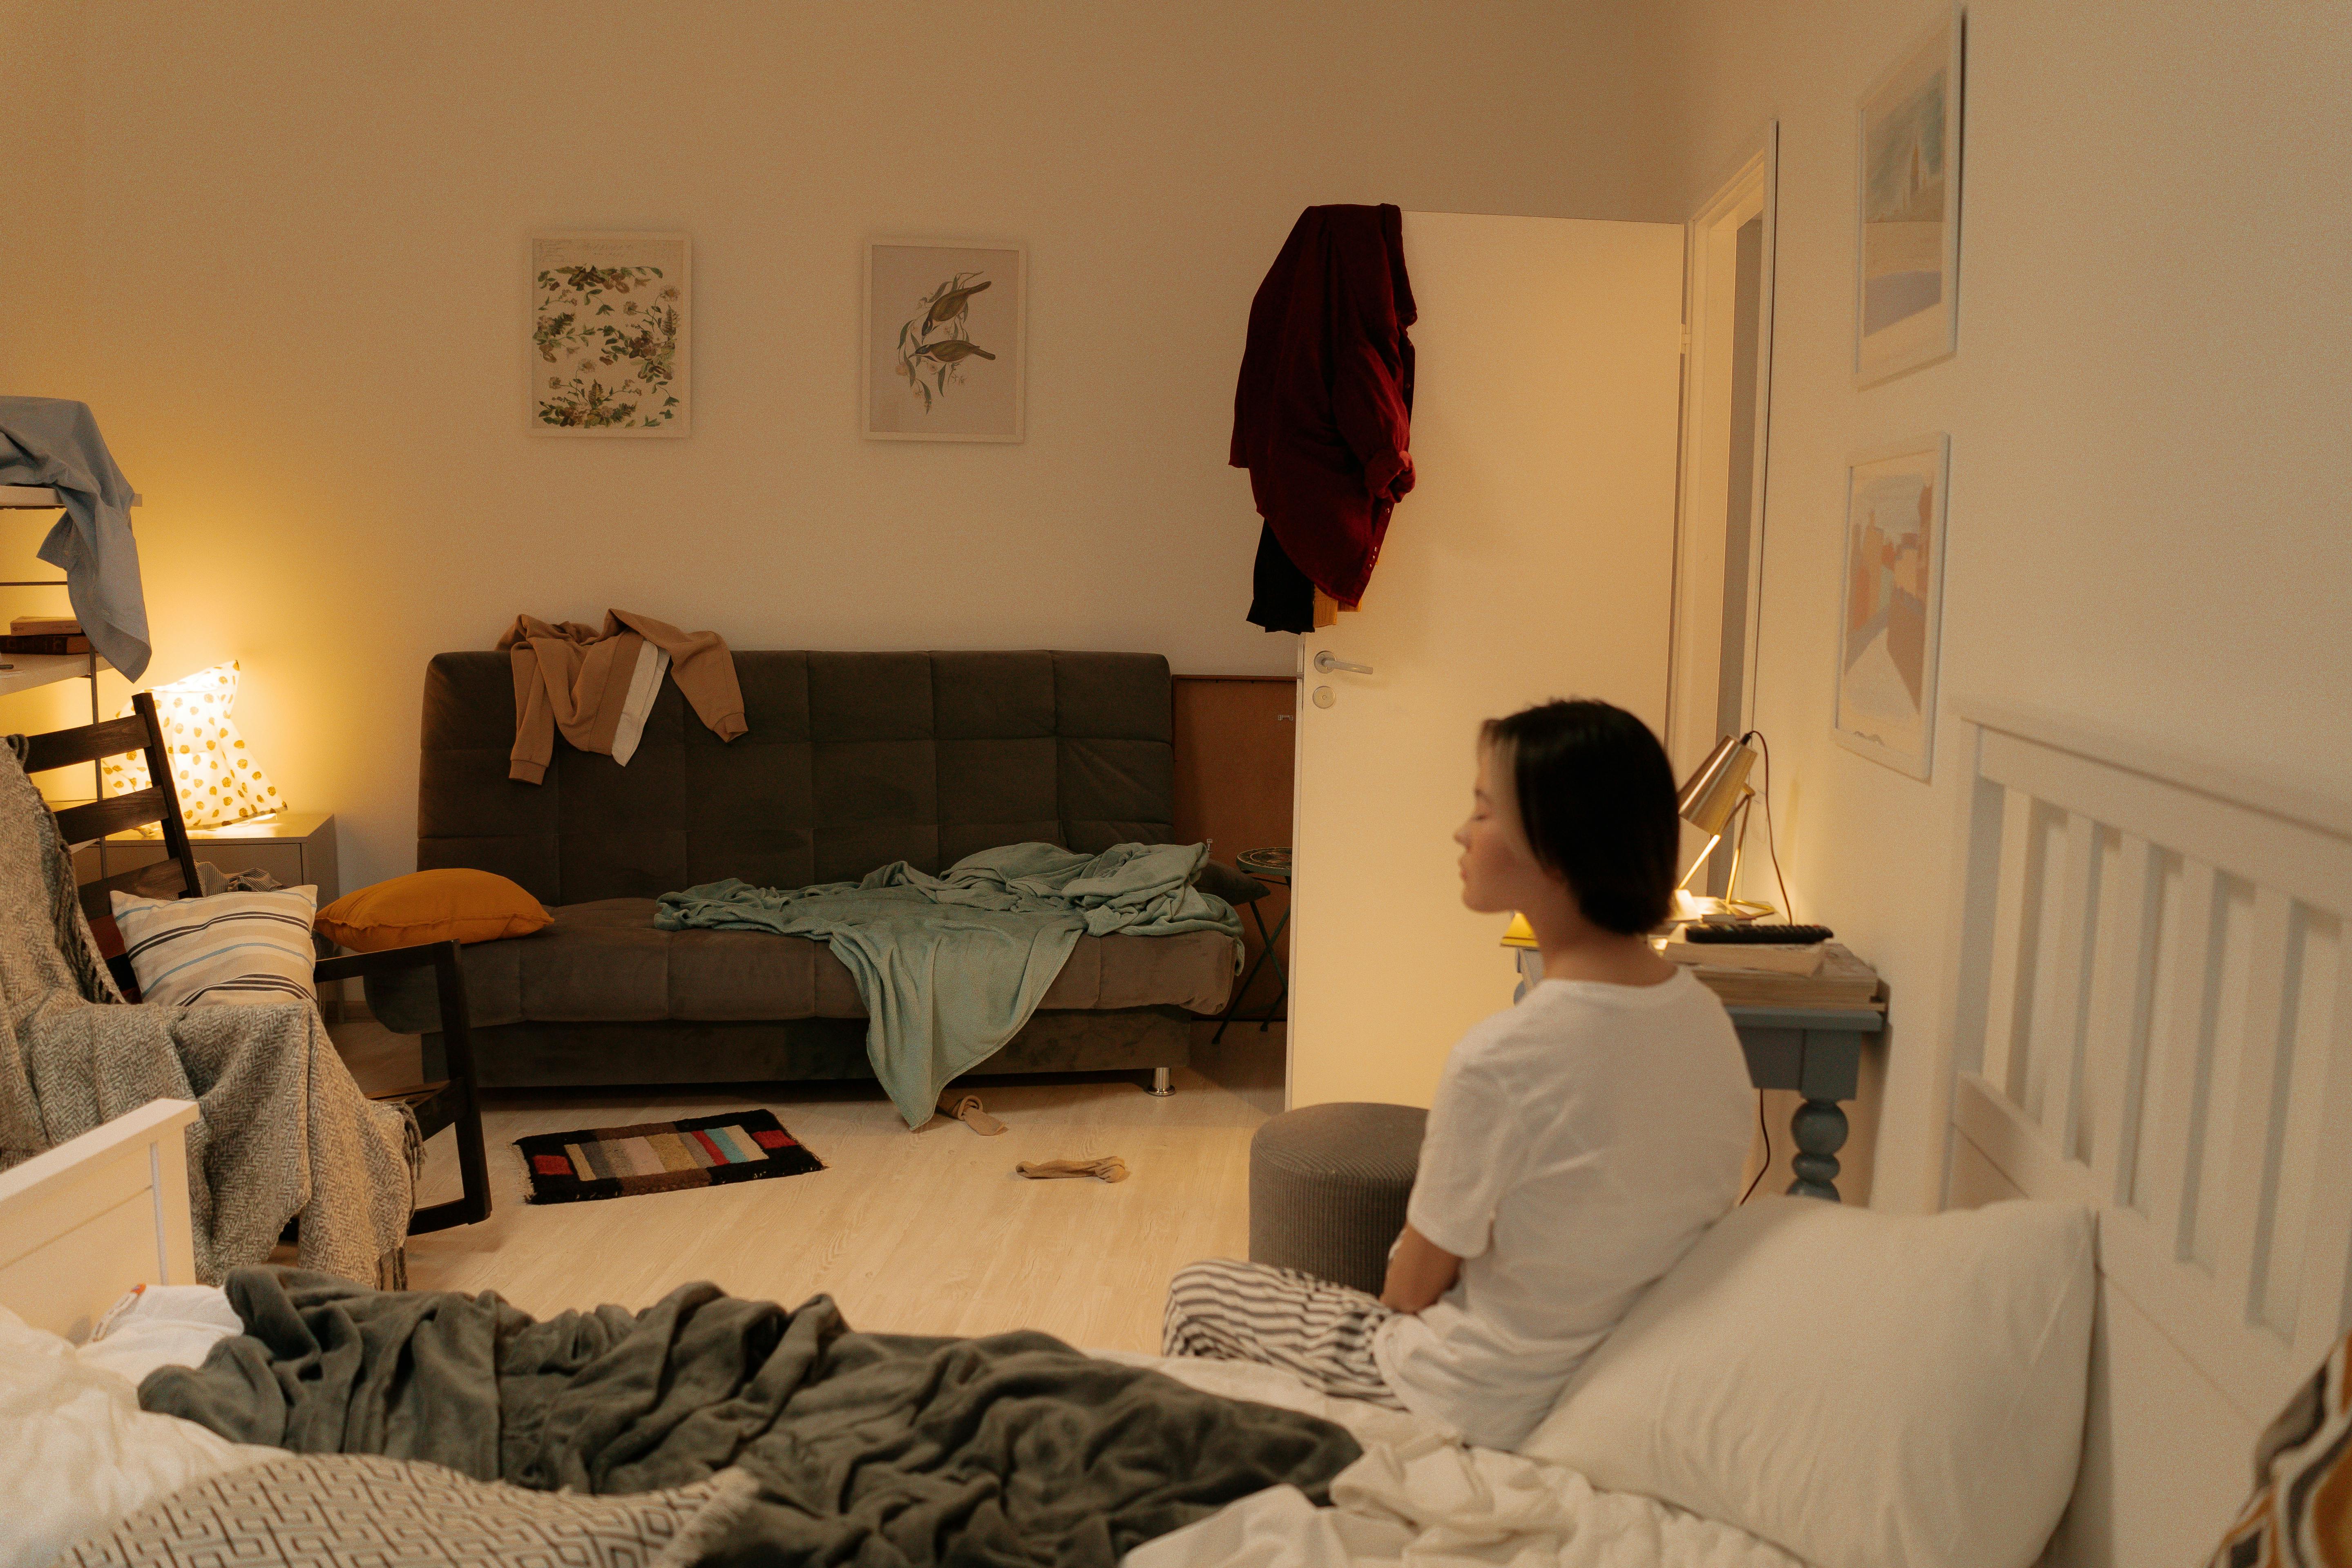 A messy bedroom with a woman sitting on the bed | Source: Pexels